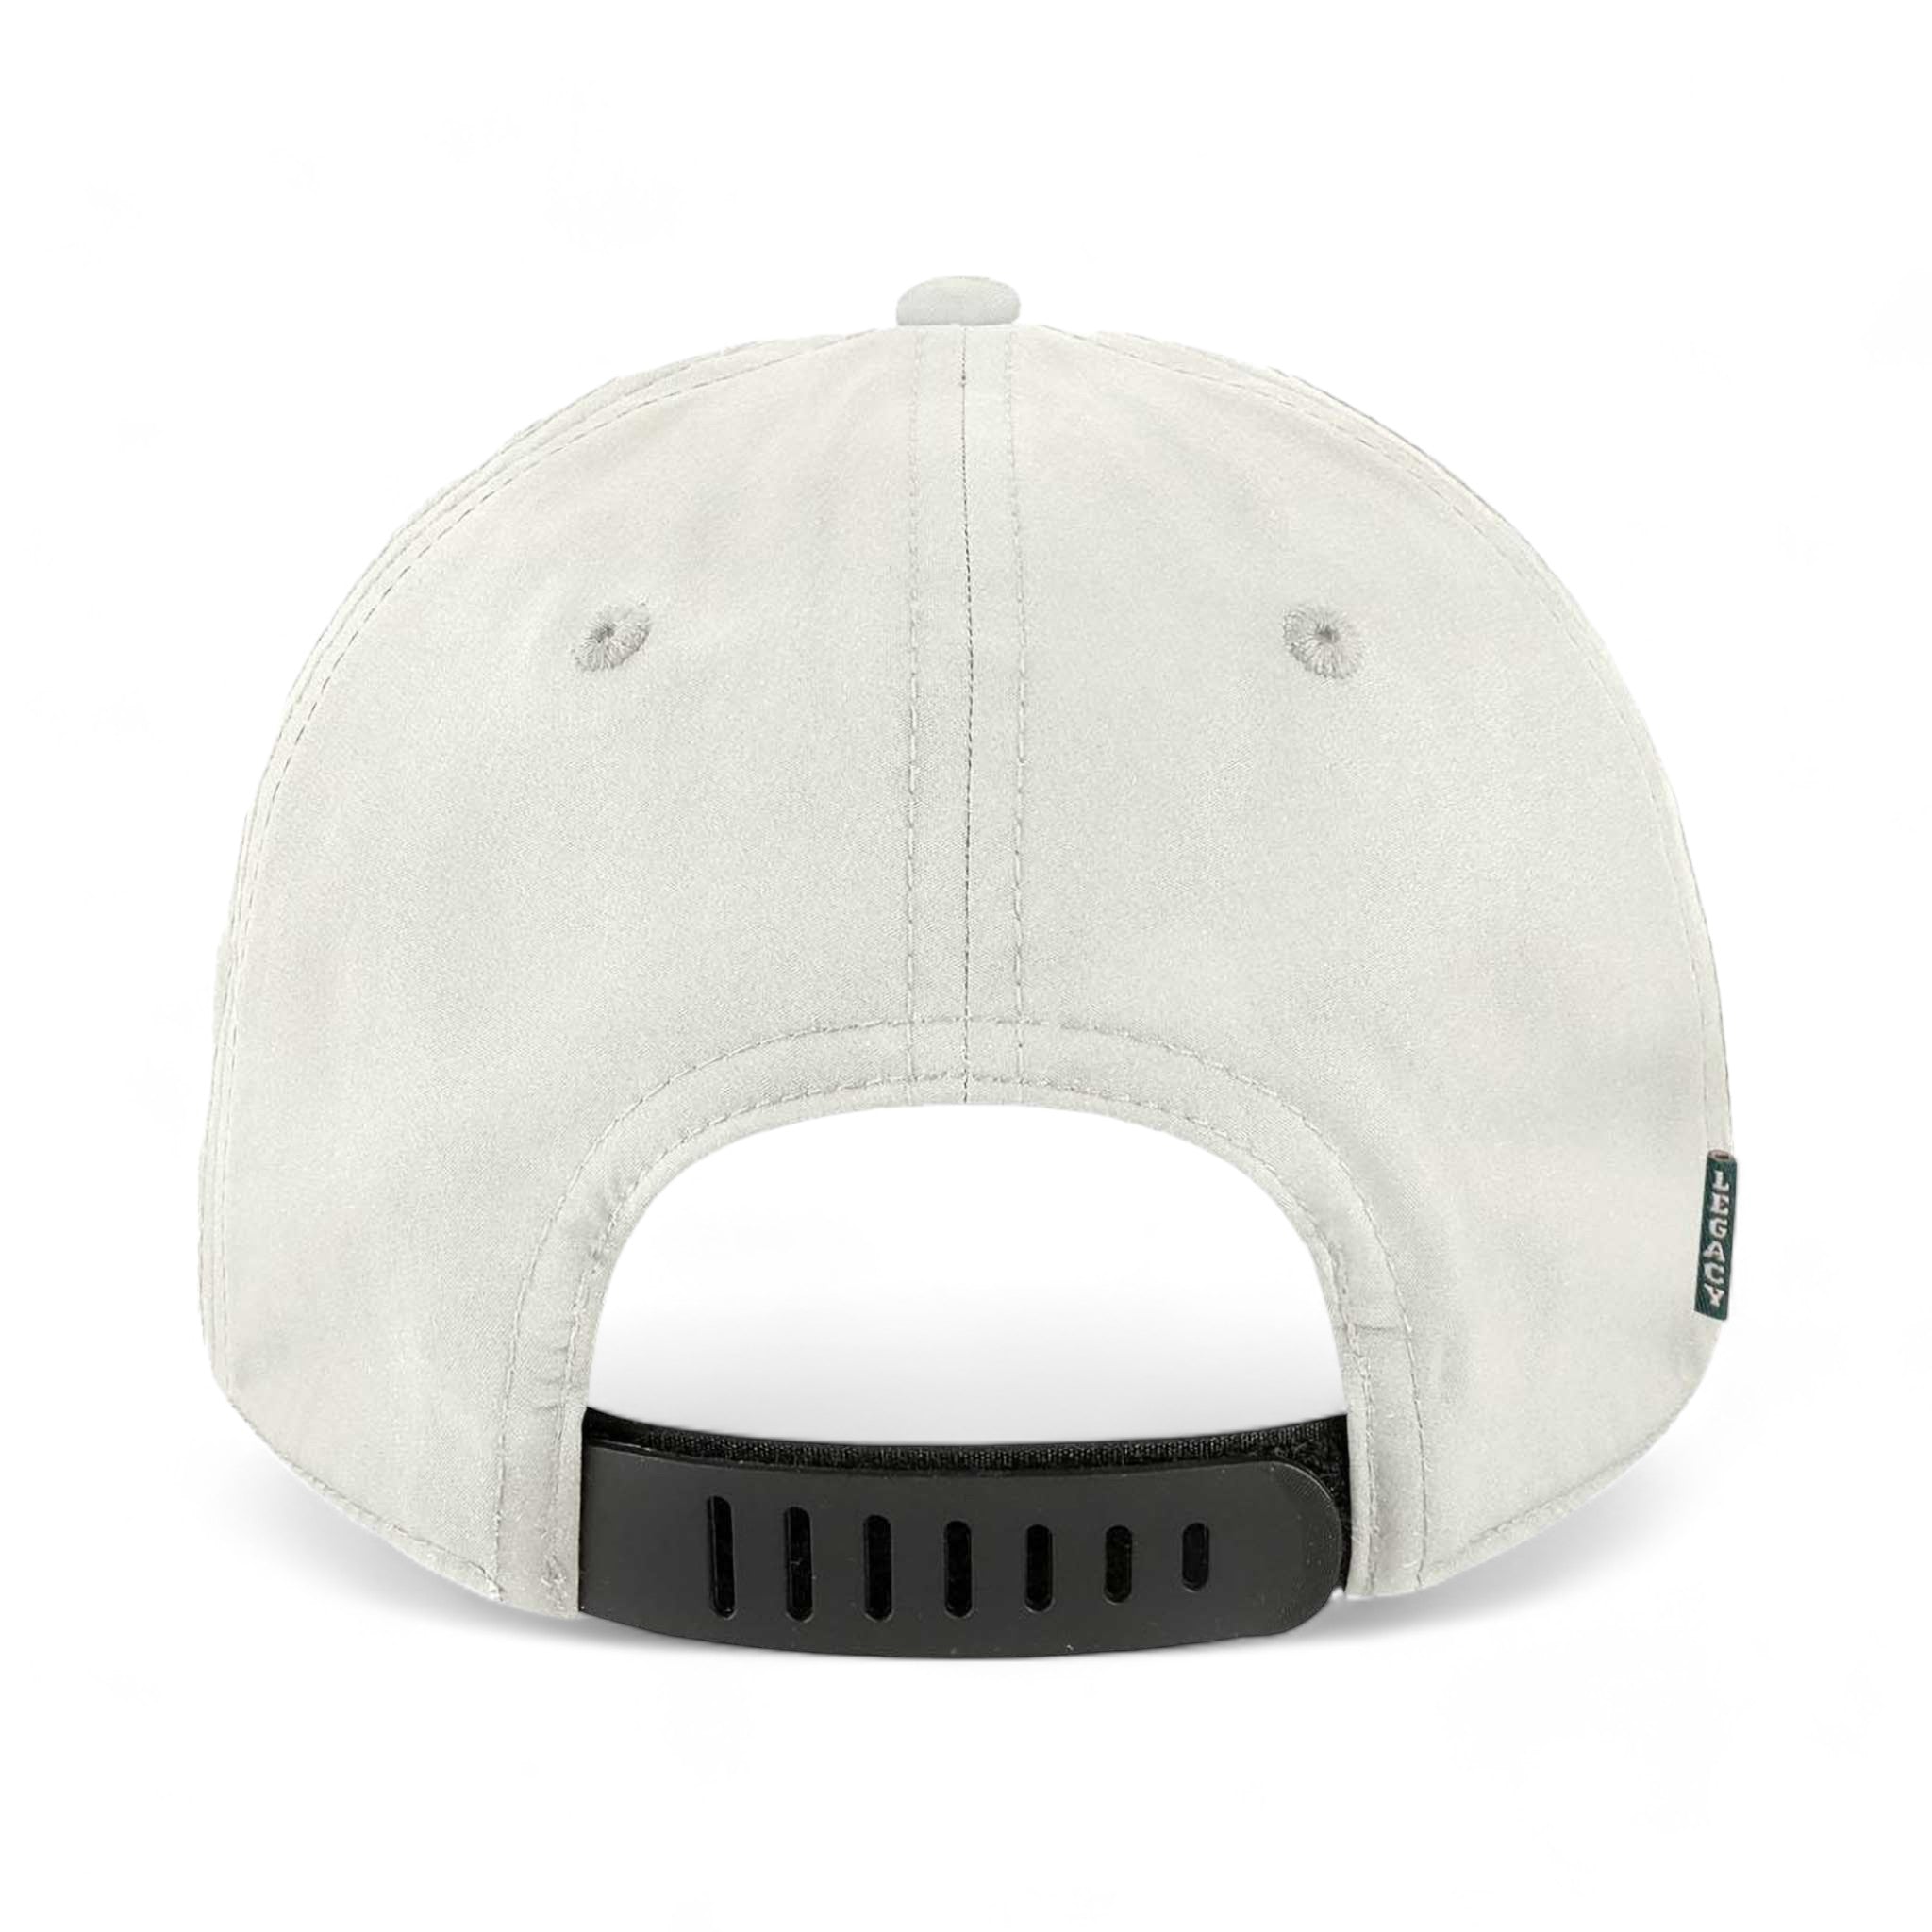 Back view of LEGACY B9A custom hat in white